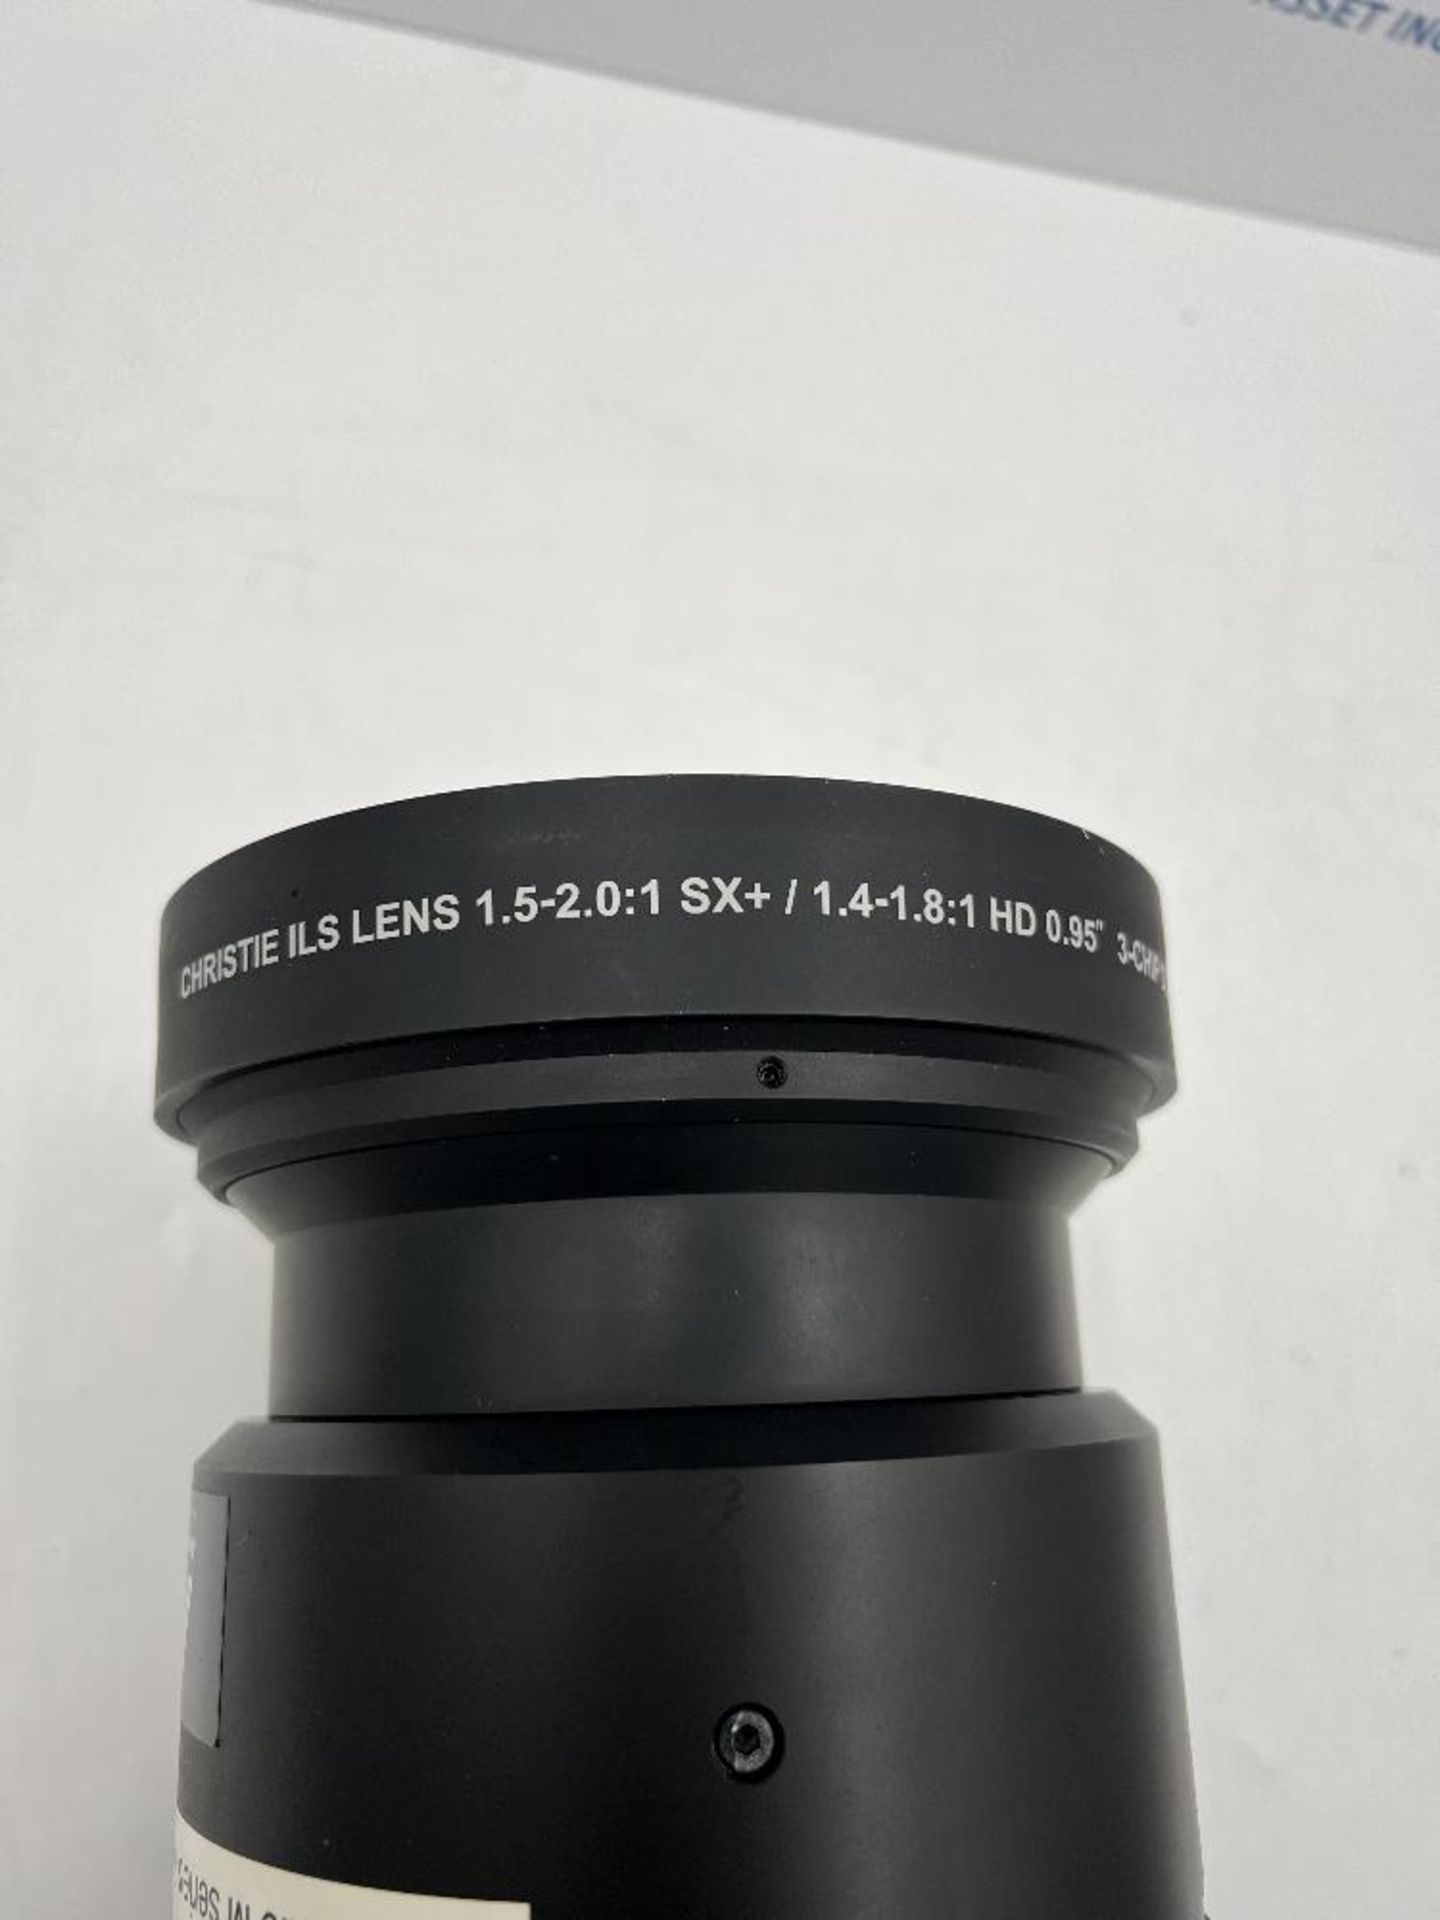 Christie M-Series HD Lens 1.4-1.8 With Heavy Duty Peli Case - Image 5 of 9